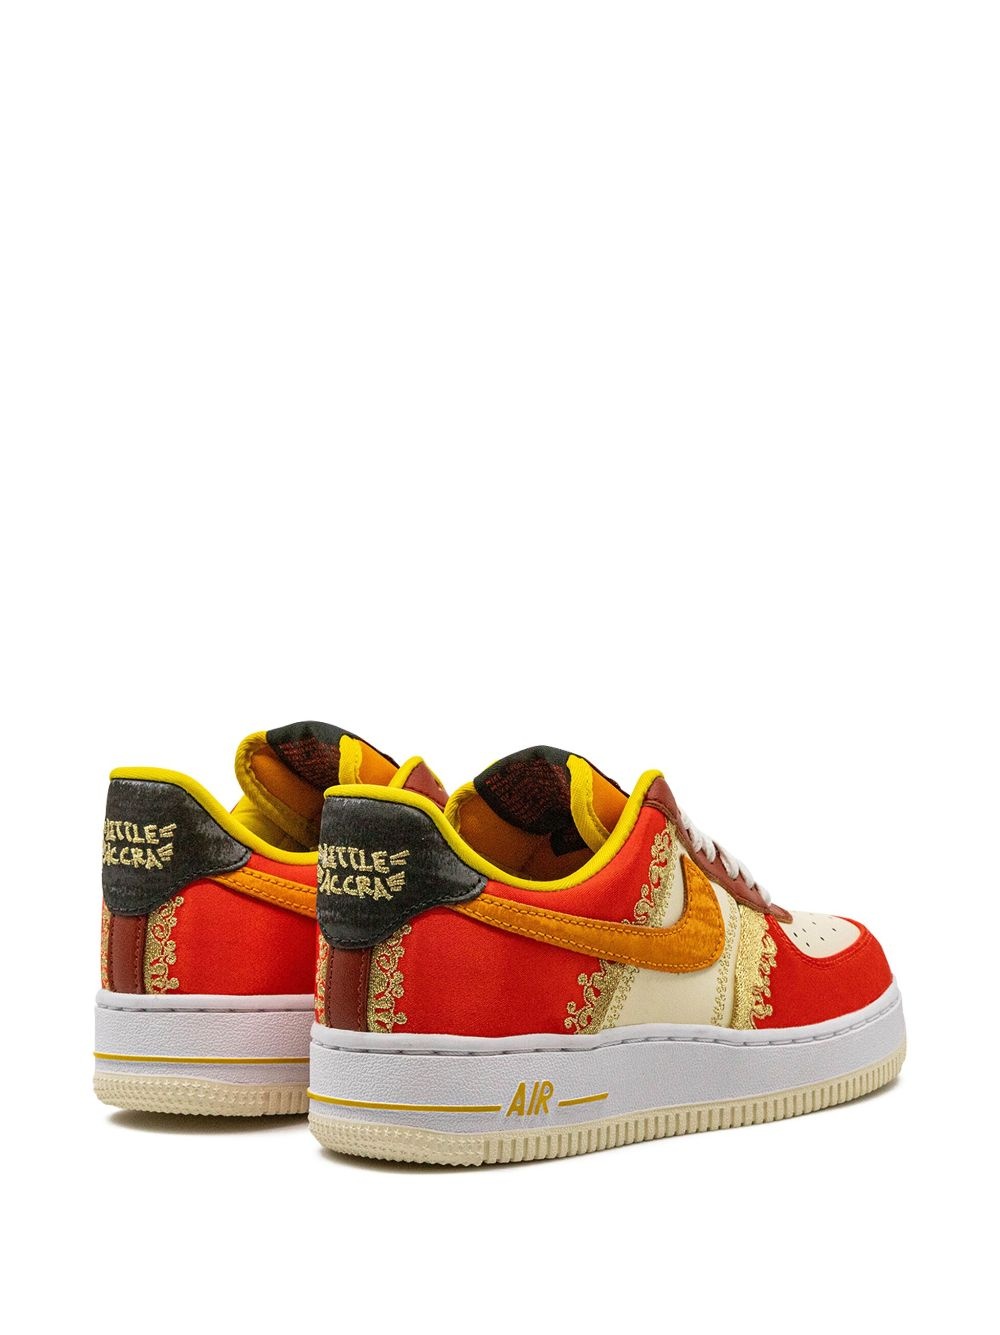 Air Force 1 '07 "Little Accra" sneakers - 3